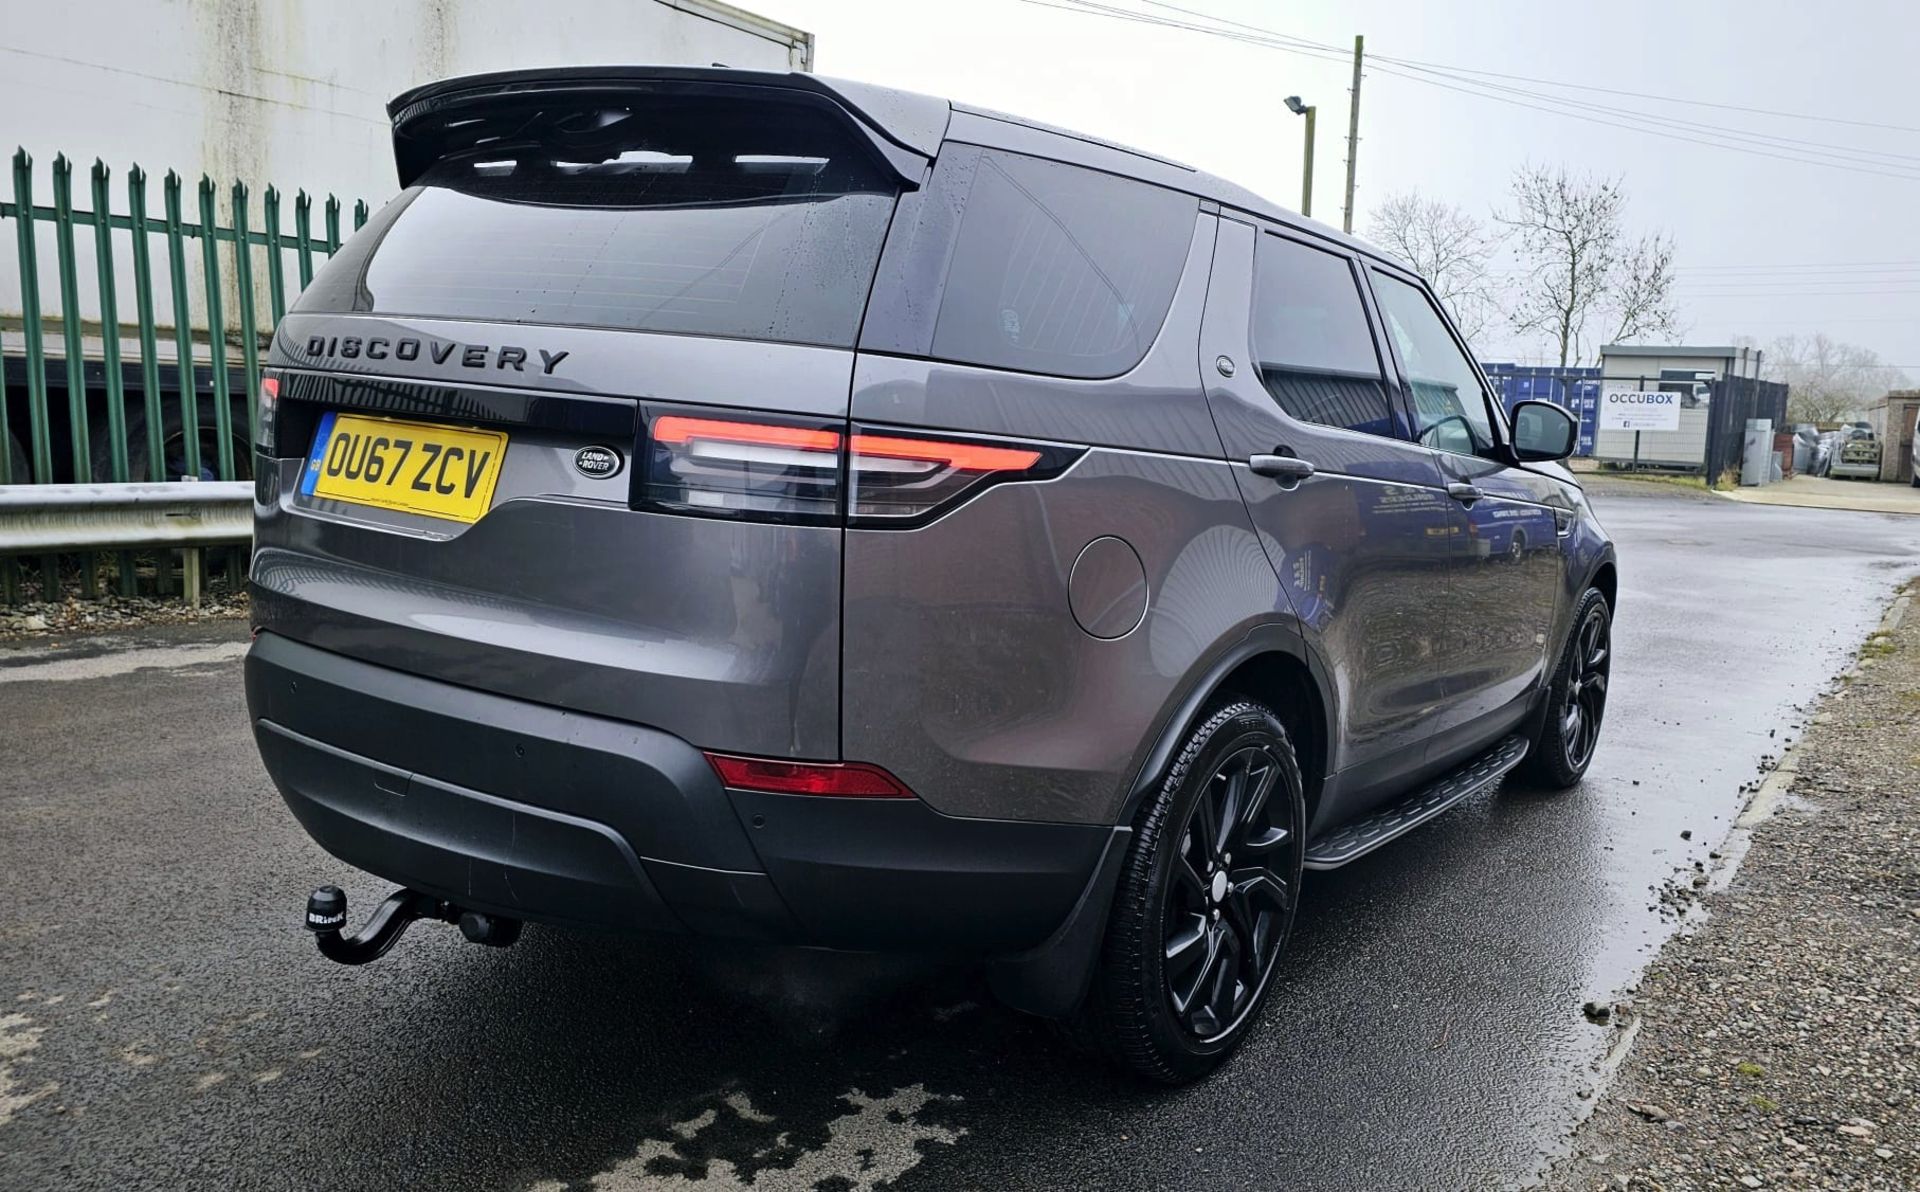 Land Rover Discovery 5 - (New Model) Diesel Auto - 2018 Model - Black Pack Edition - Sat Nav - Look - Image 15 of 45